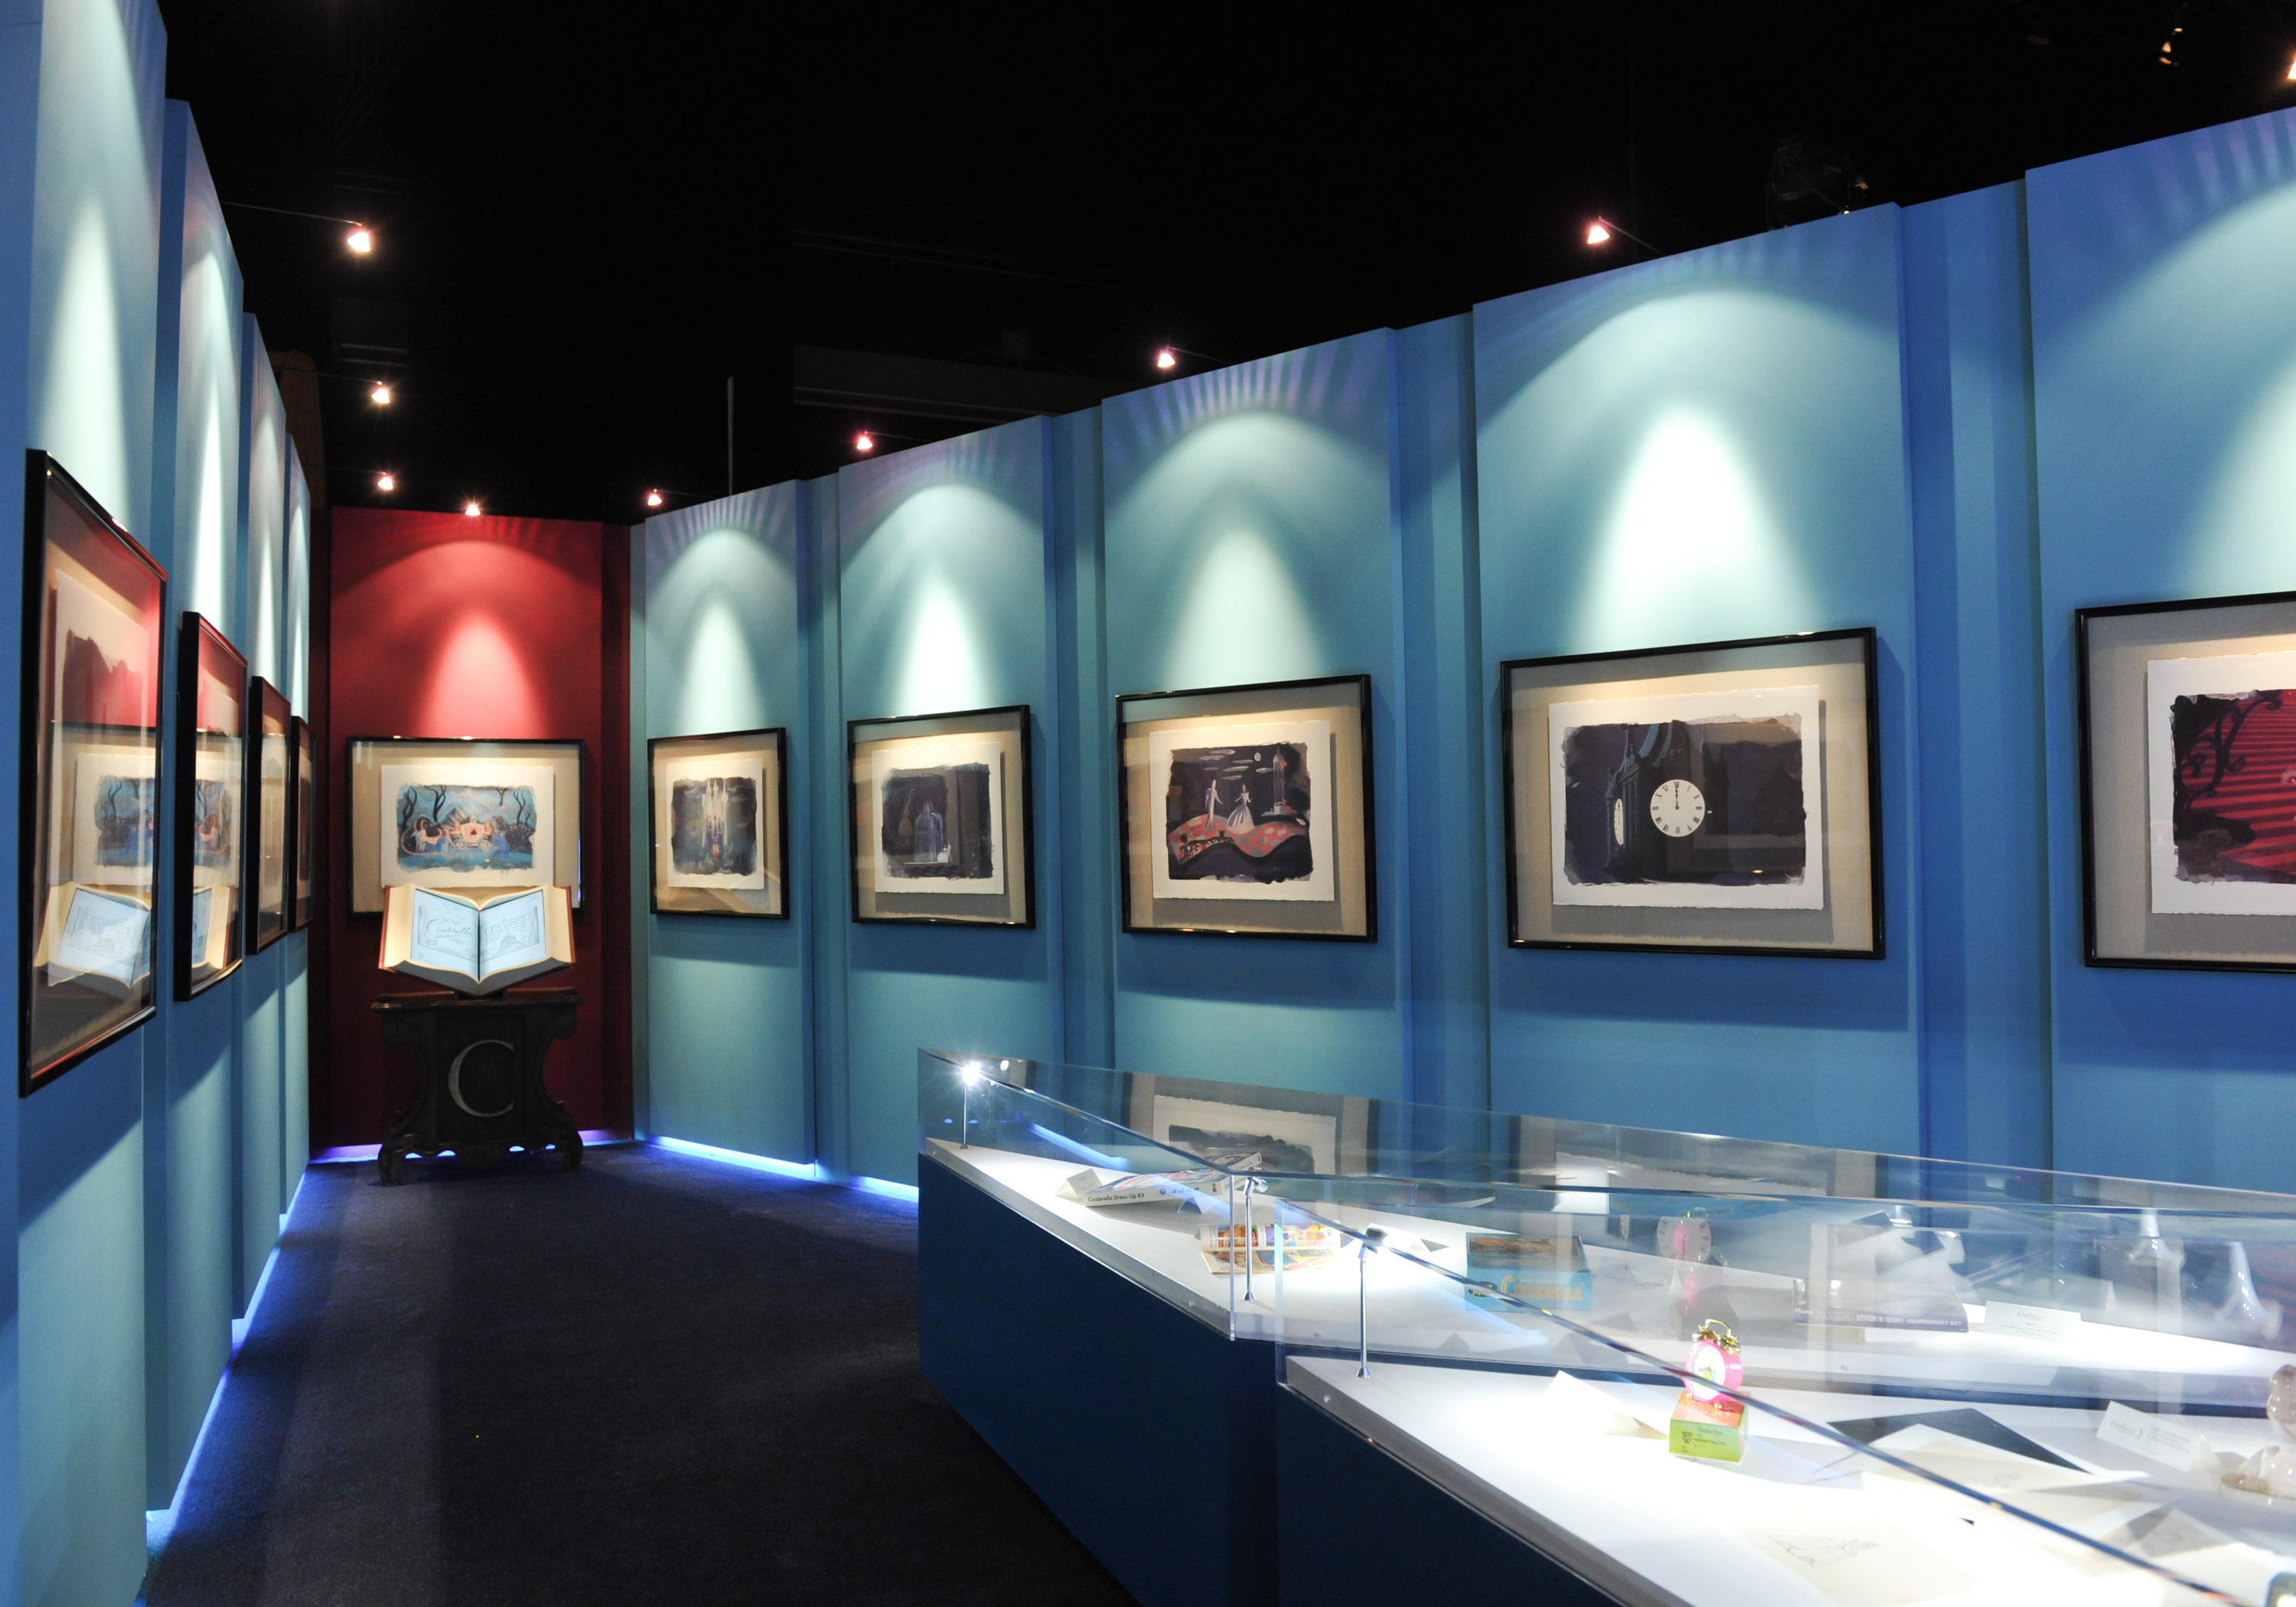 The exhibition also featured never-before-seen Disney archival artwork from the original 1950 movie.